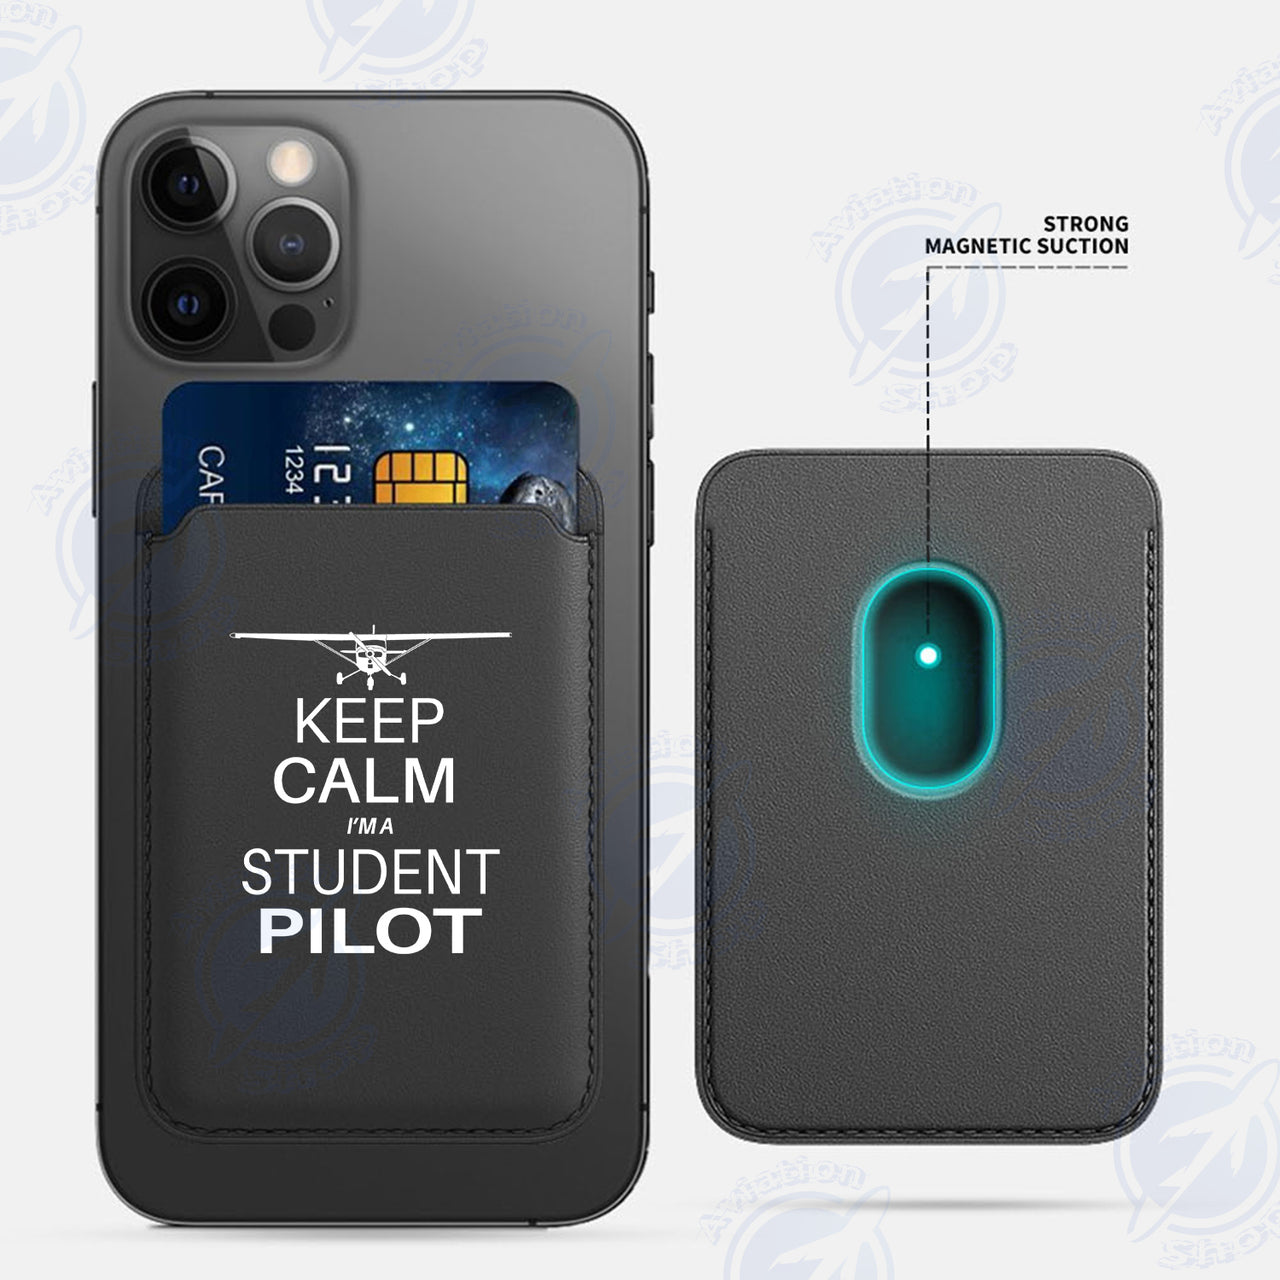 Student Pilot iPhone Cases Magnetic Card Wallet